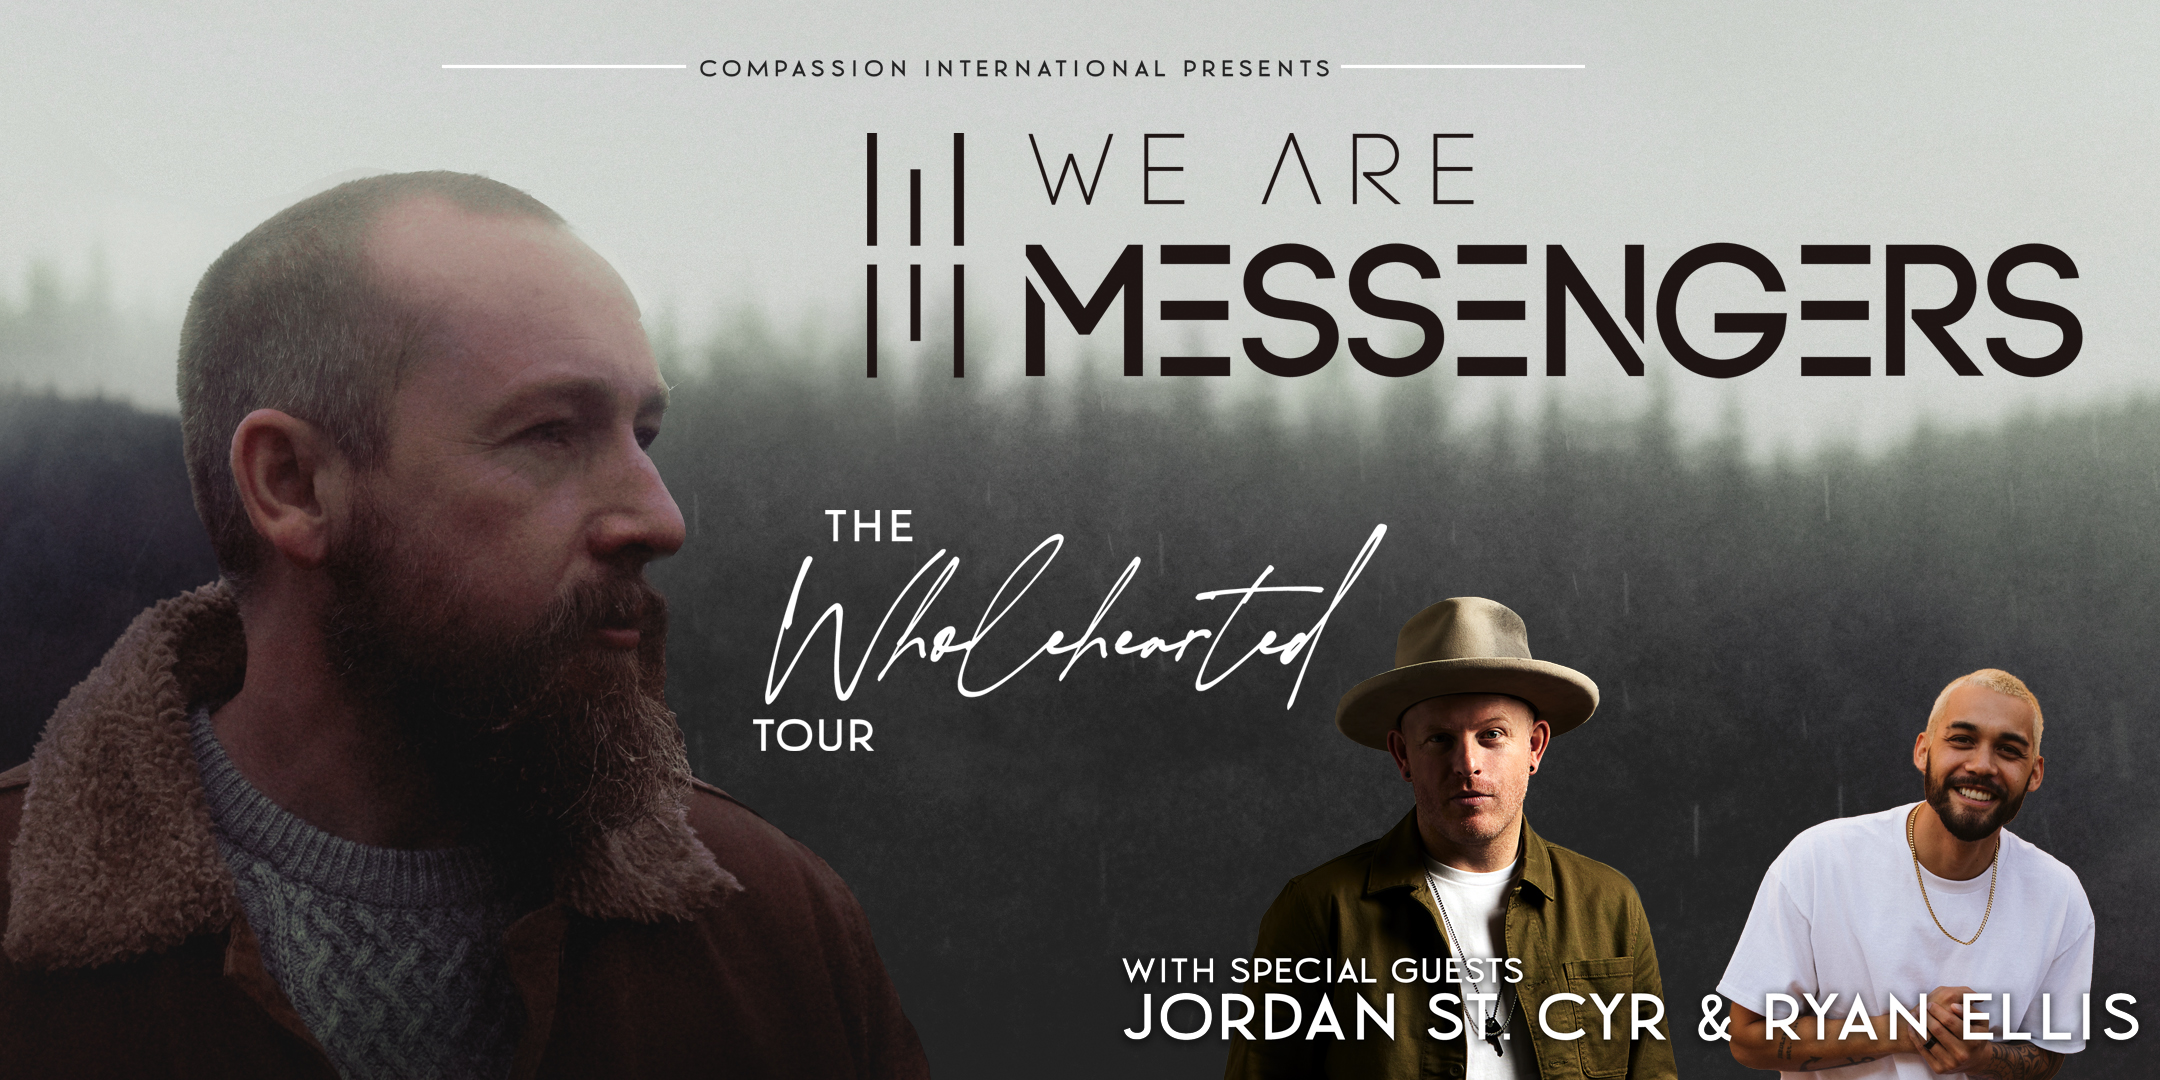 We Are Messengers "The Wholehearted Tour" featuring Jordan St. Cyr. and